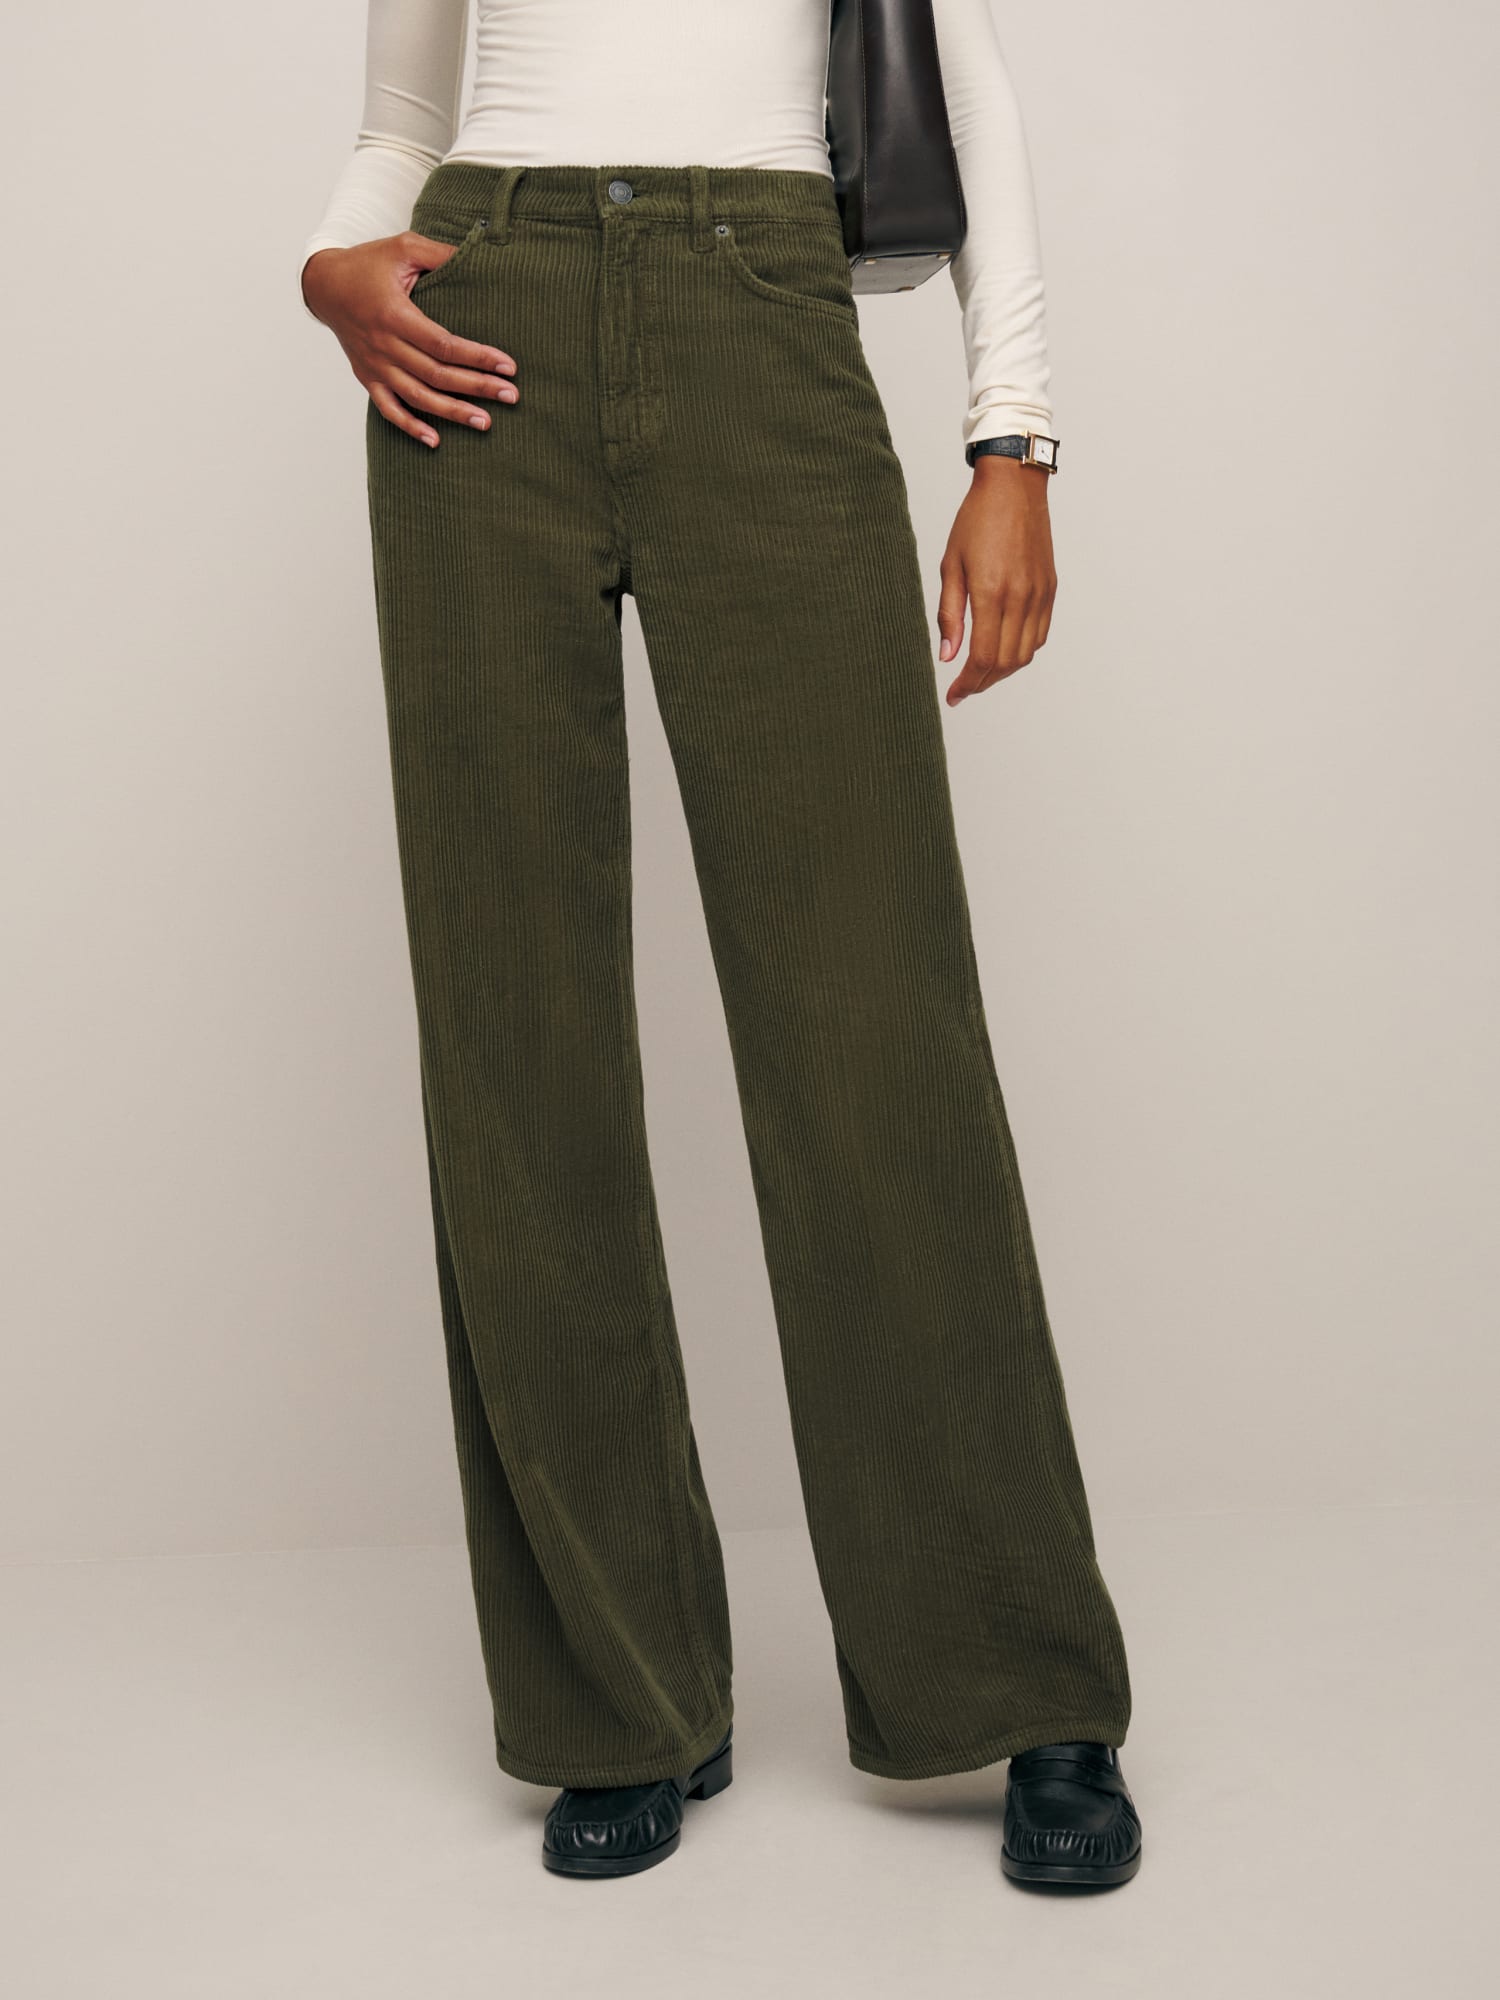 Buy Relaxed Fit Wide Leg Pants with Button Closure and Pockets